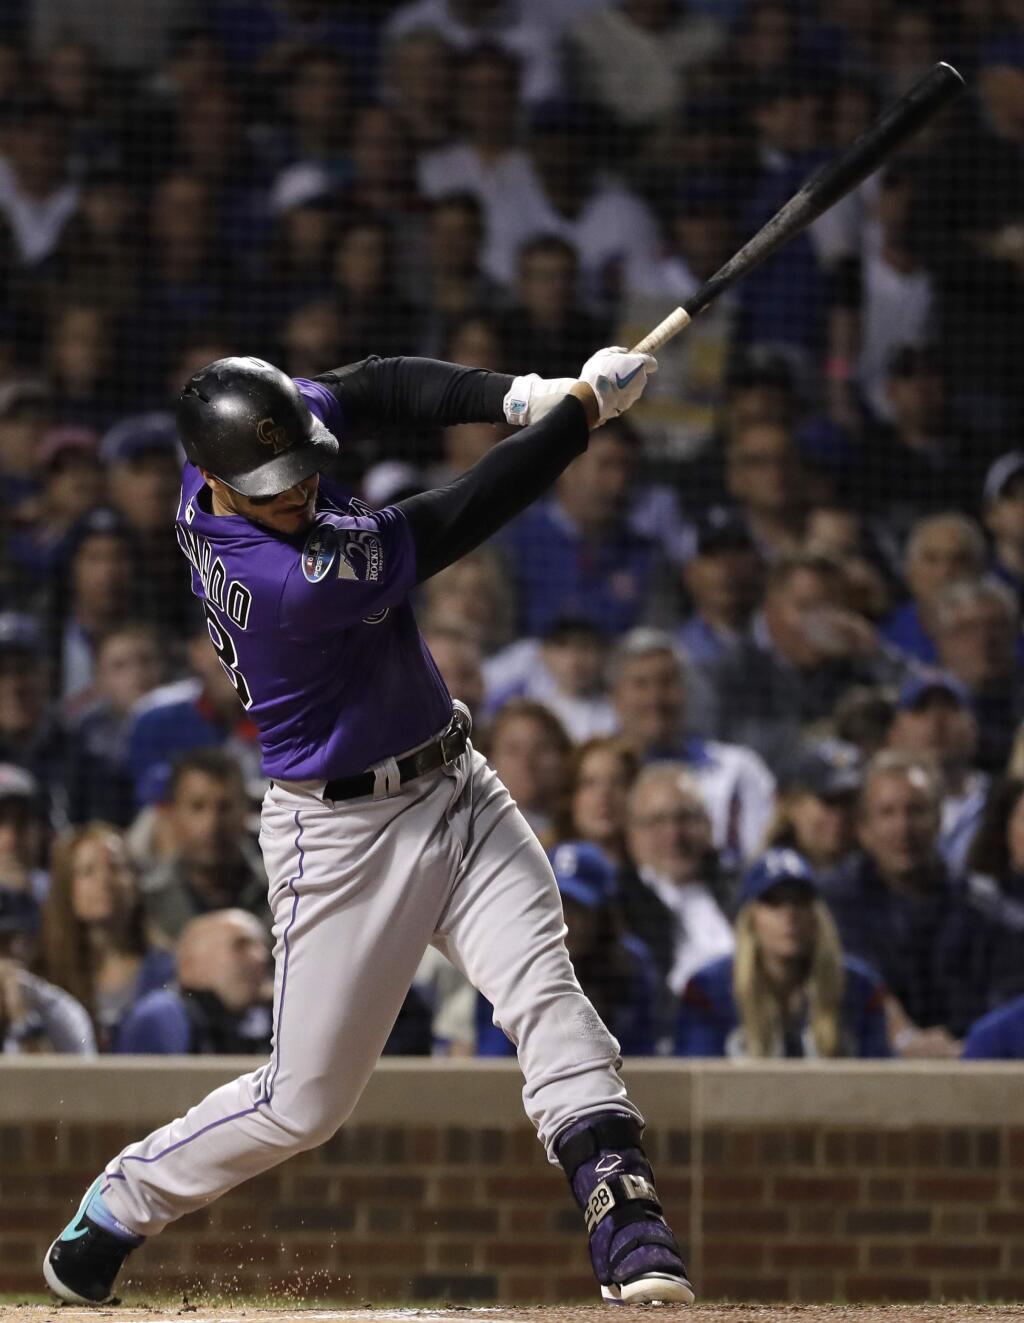 The Colorado Rockies' Nolan Arenado hits a sacrifice fly against the Chicago Cubs during the first inning of the National League wild-card game Tuesday, Oct. 2, 2018, in Chicago. (AP Photo/Nam Y. Huh)